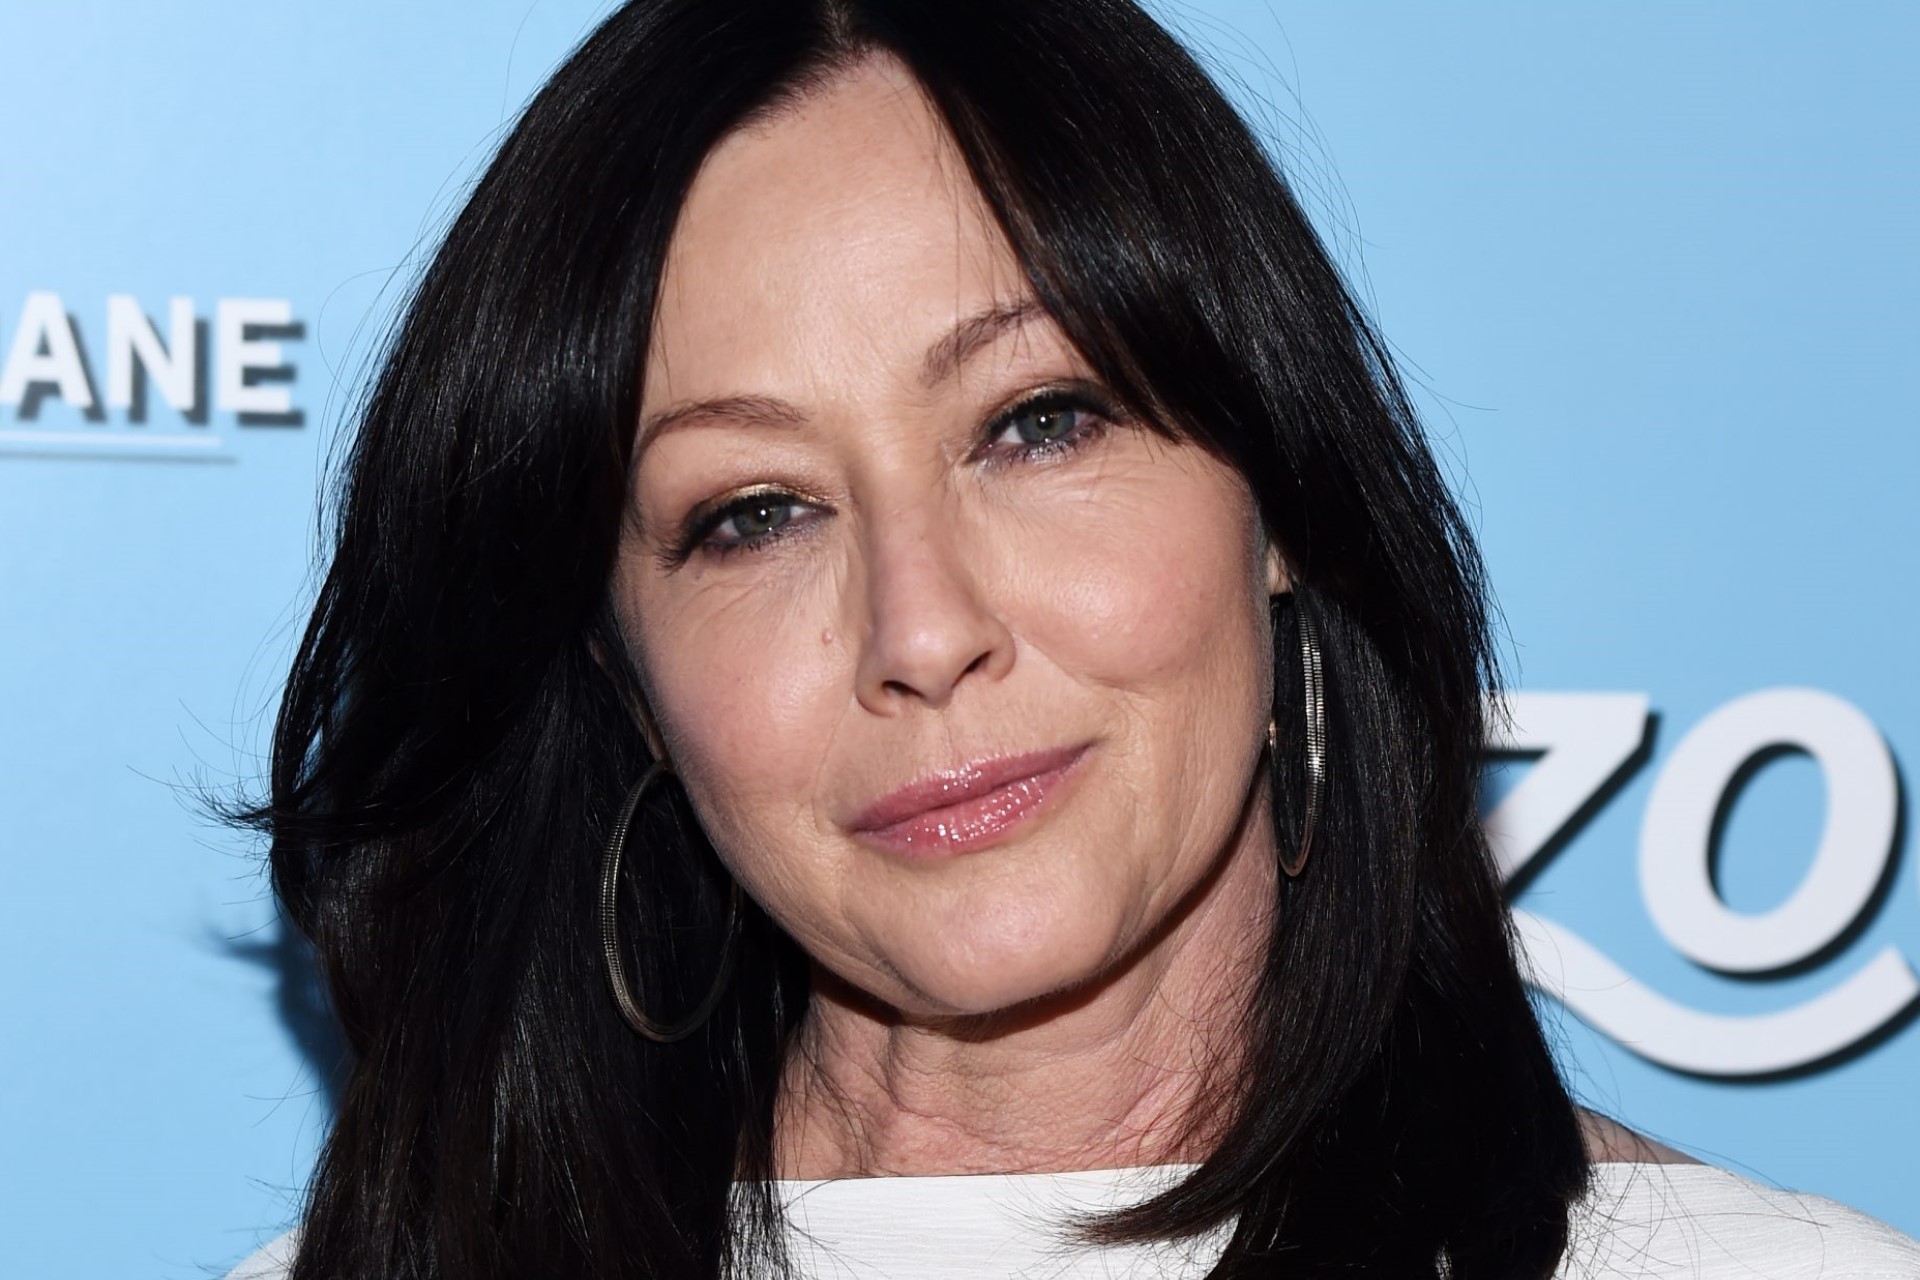 Shannen Doherty: the tragic story of her death at 53